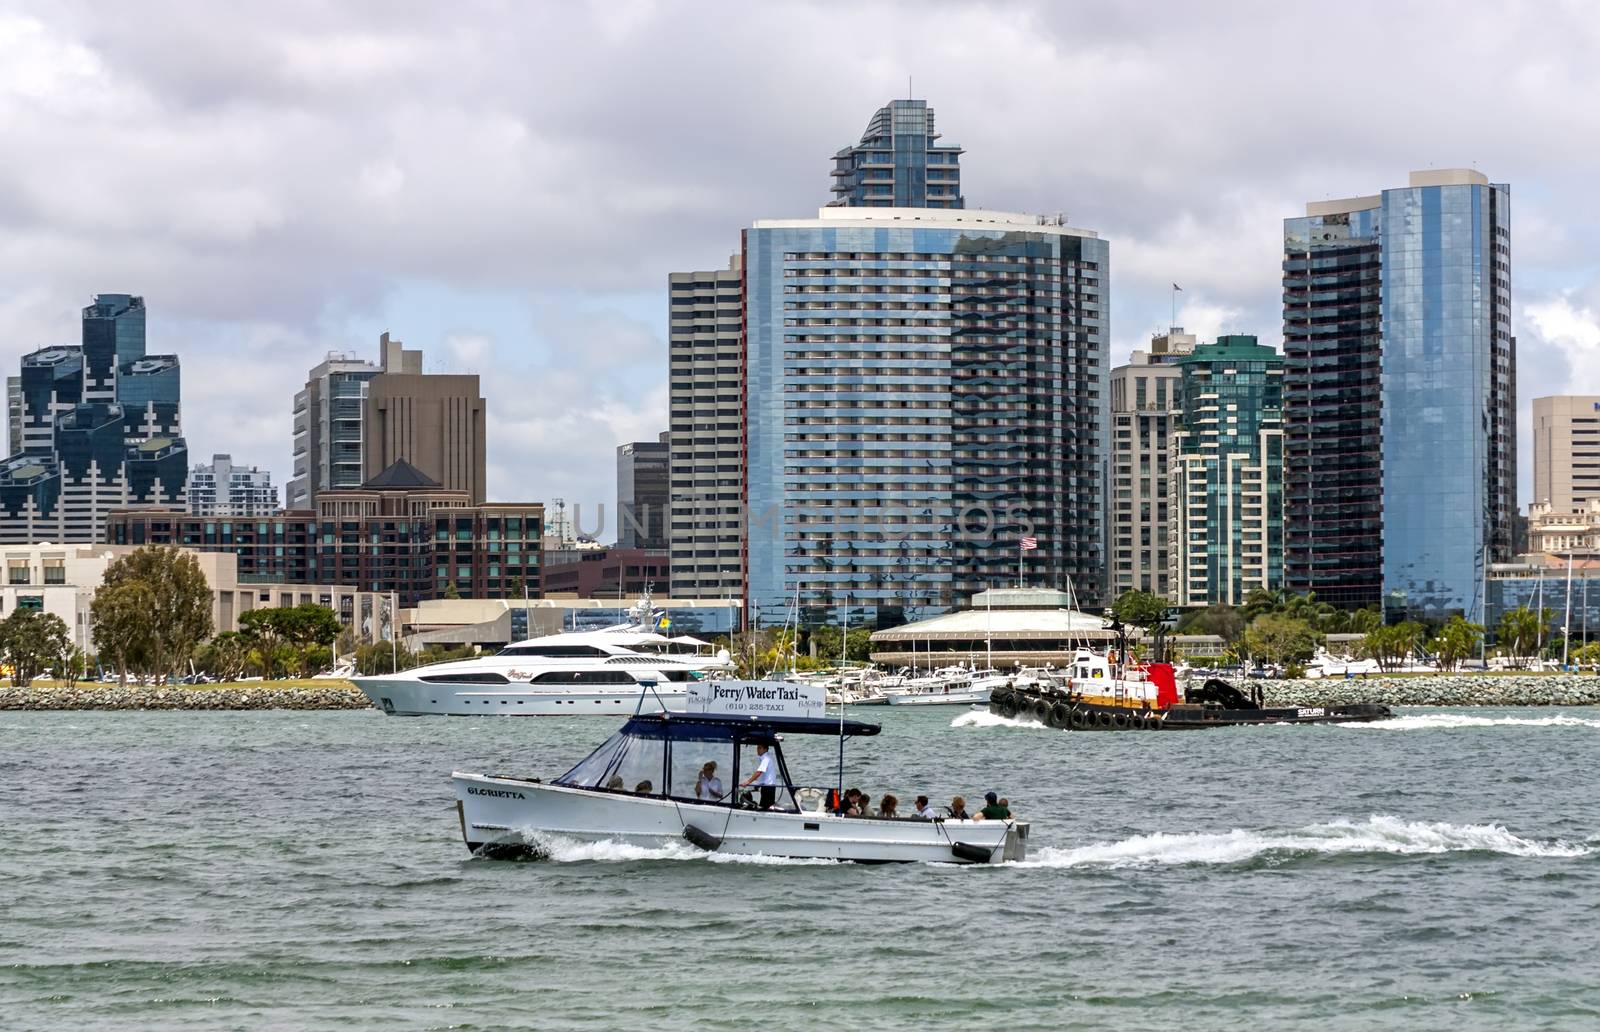 SAN  DIEGO,CA - MAY 21,2014:A View of San Diego Bay in spring Day, California,United states of America.